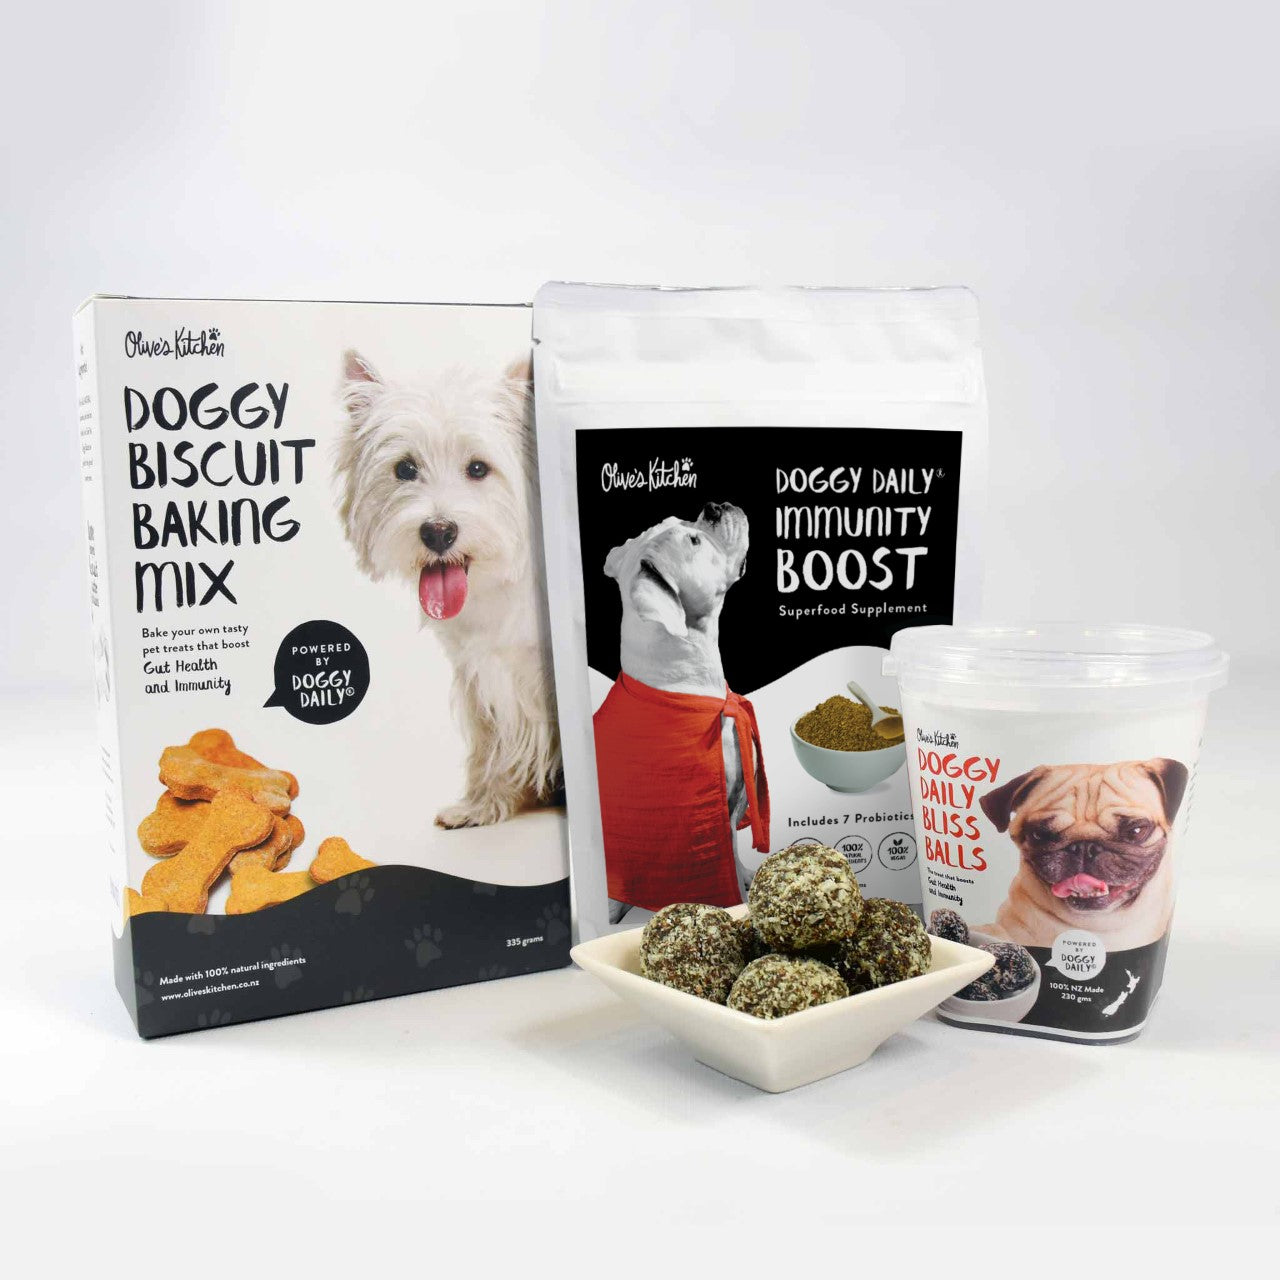 The Doggy Daily All Round Treater Pack